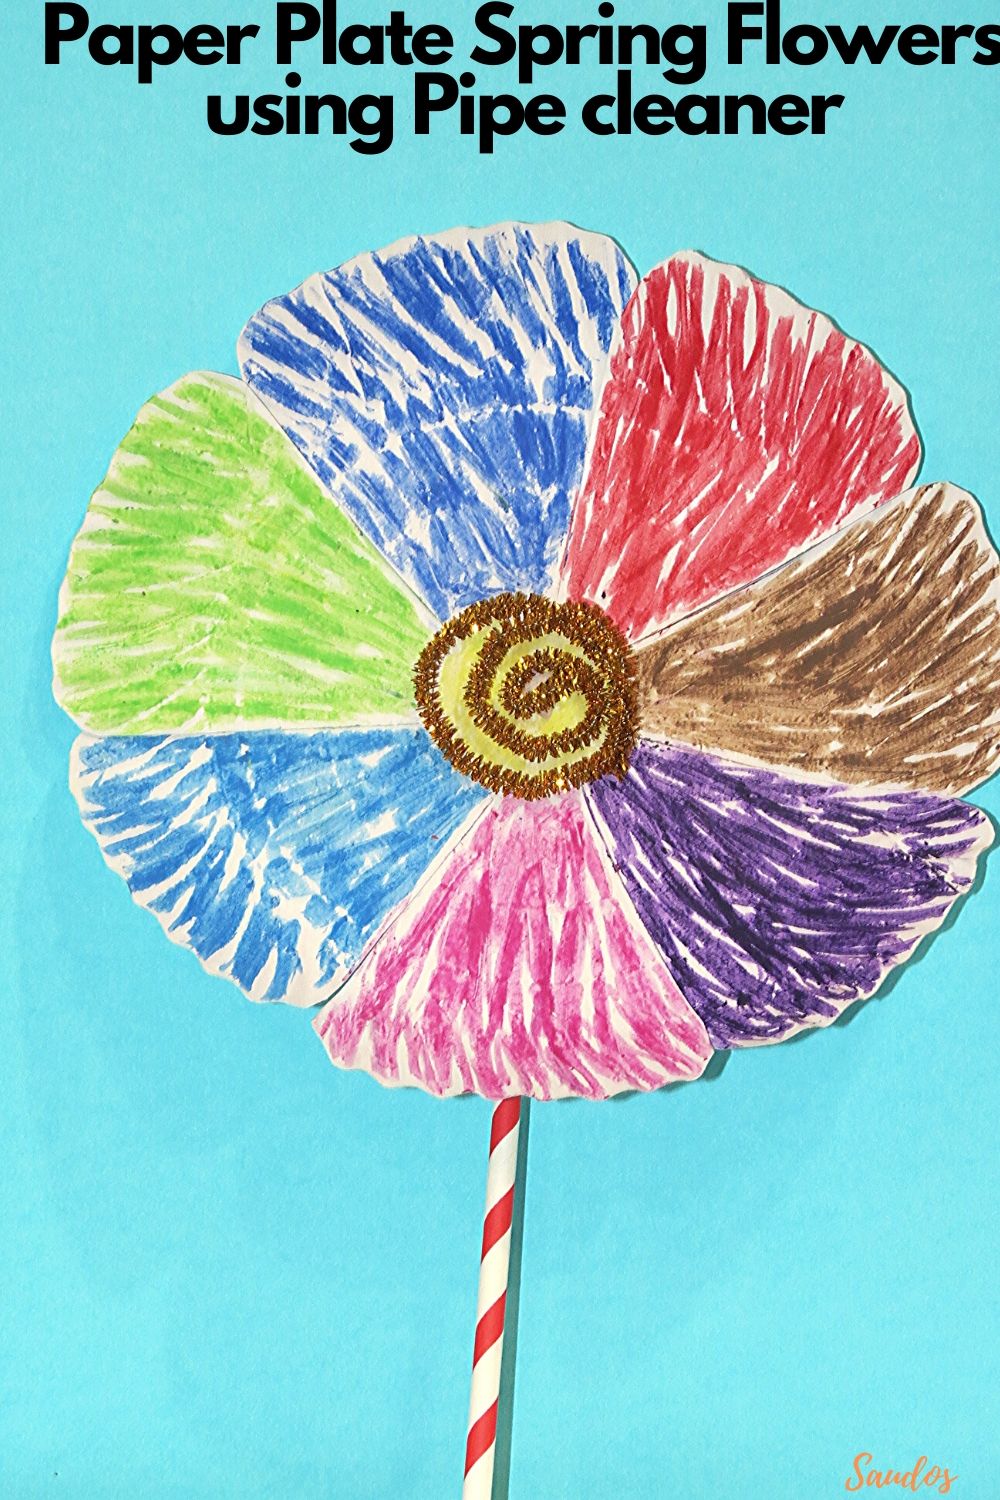 Paper Plate Spring Flowers using Pipe cleaner